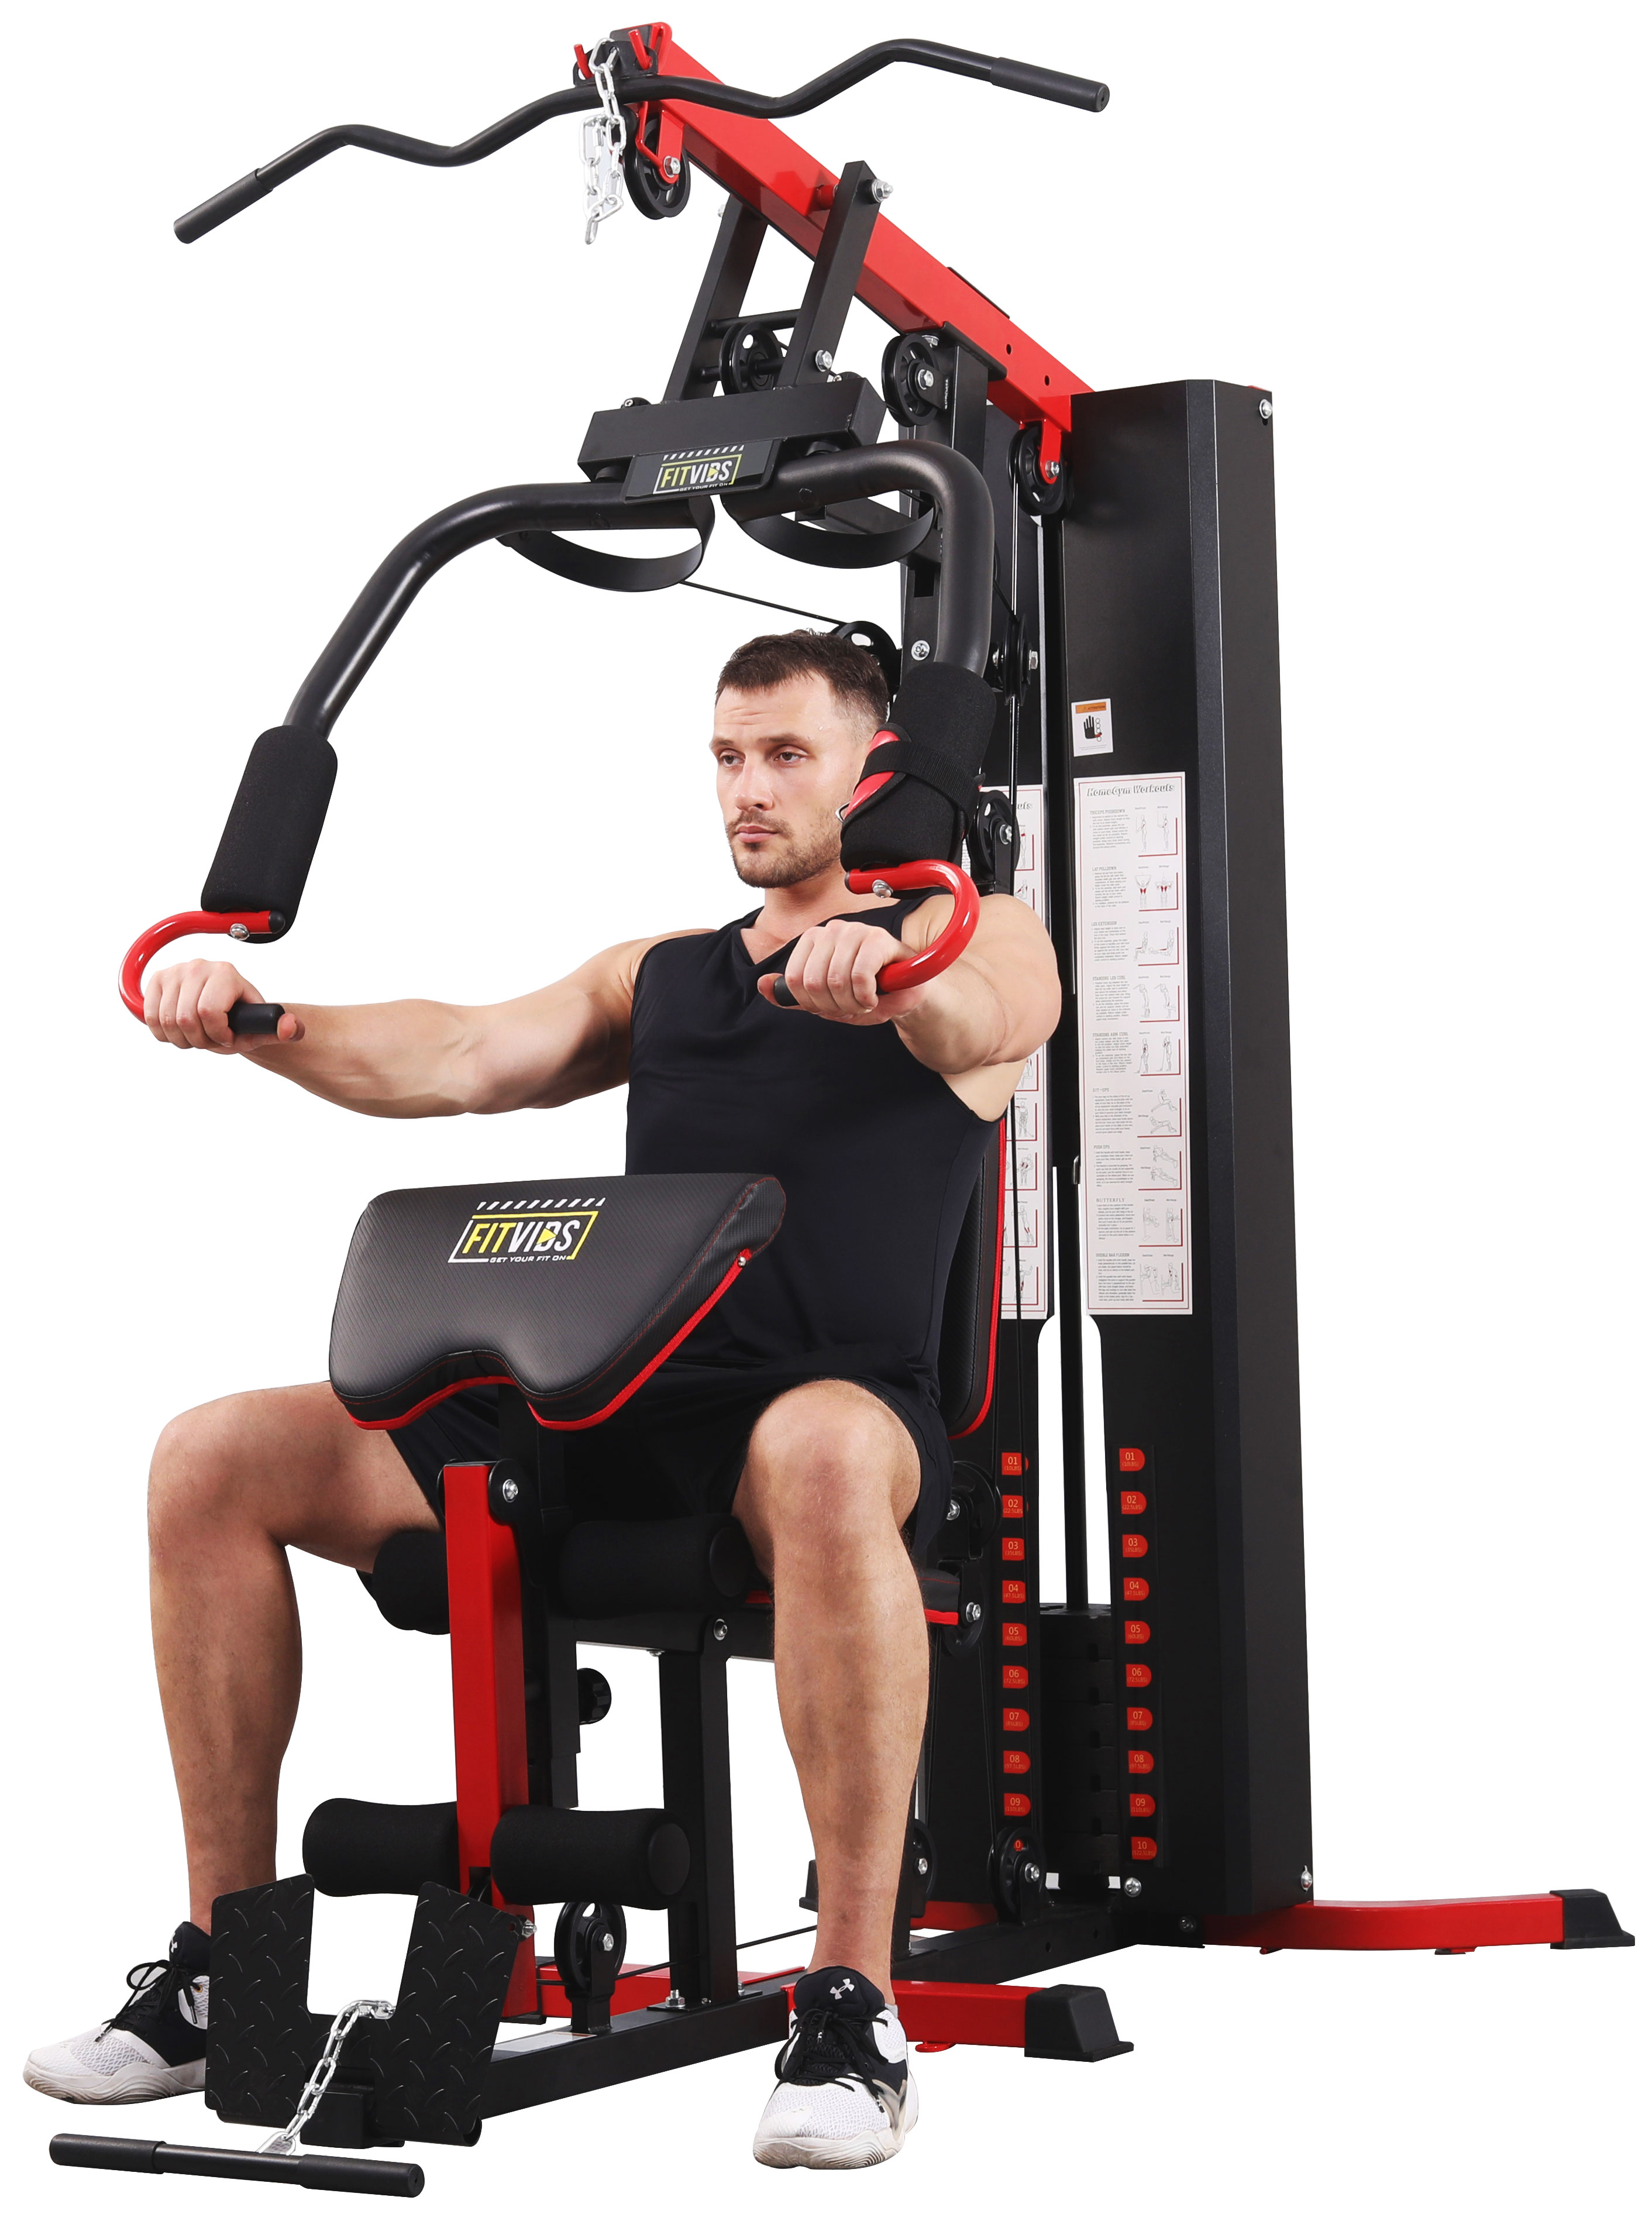 Fitvids LX750 Home Gym System Workout Station with 330 Lbs of Resistance, 122.5 Lbs Weight Stack, One Station, Comes with Installation Instruction Video, Ships in 5 Boxes - image 1 of 13